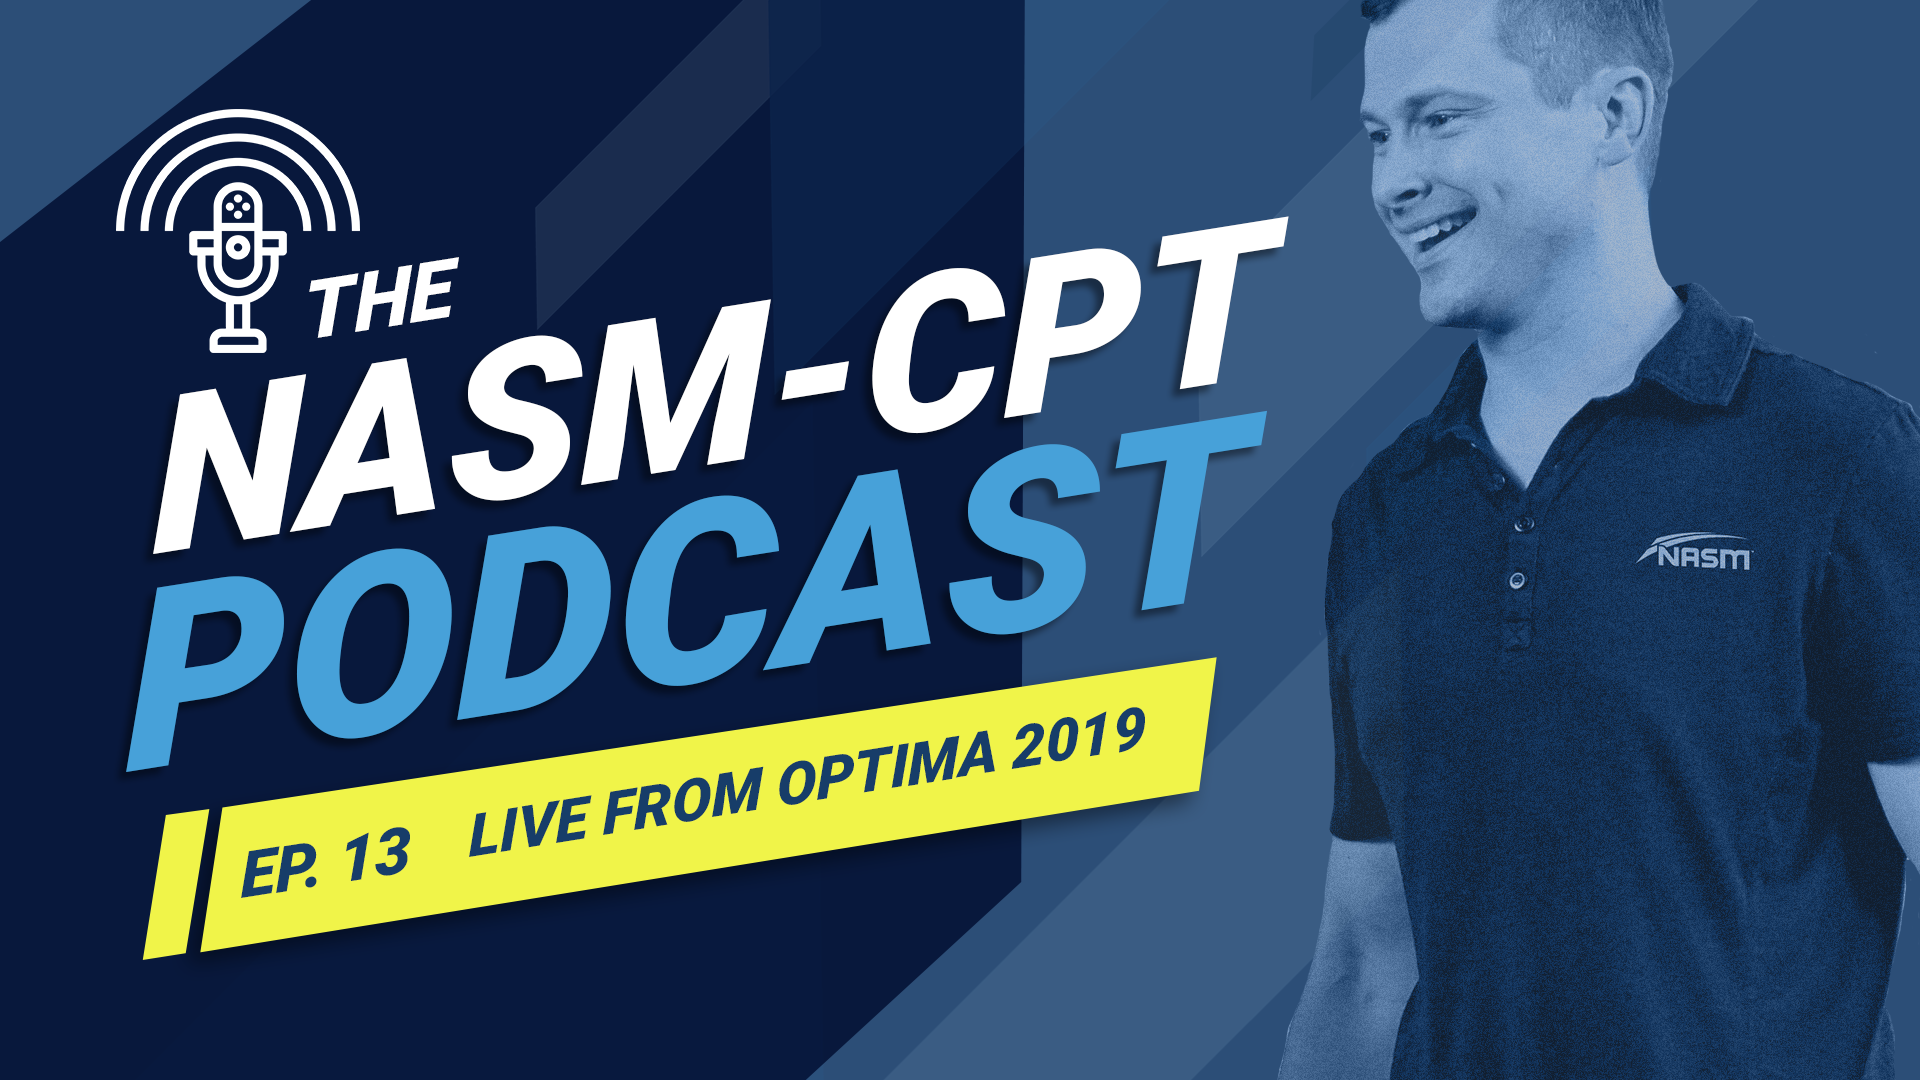 The 150store-CPT Podcast: Live from Optima 2019 Conference